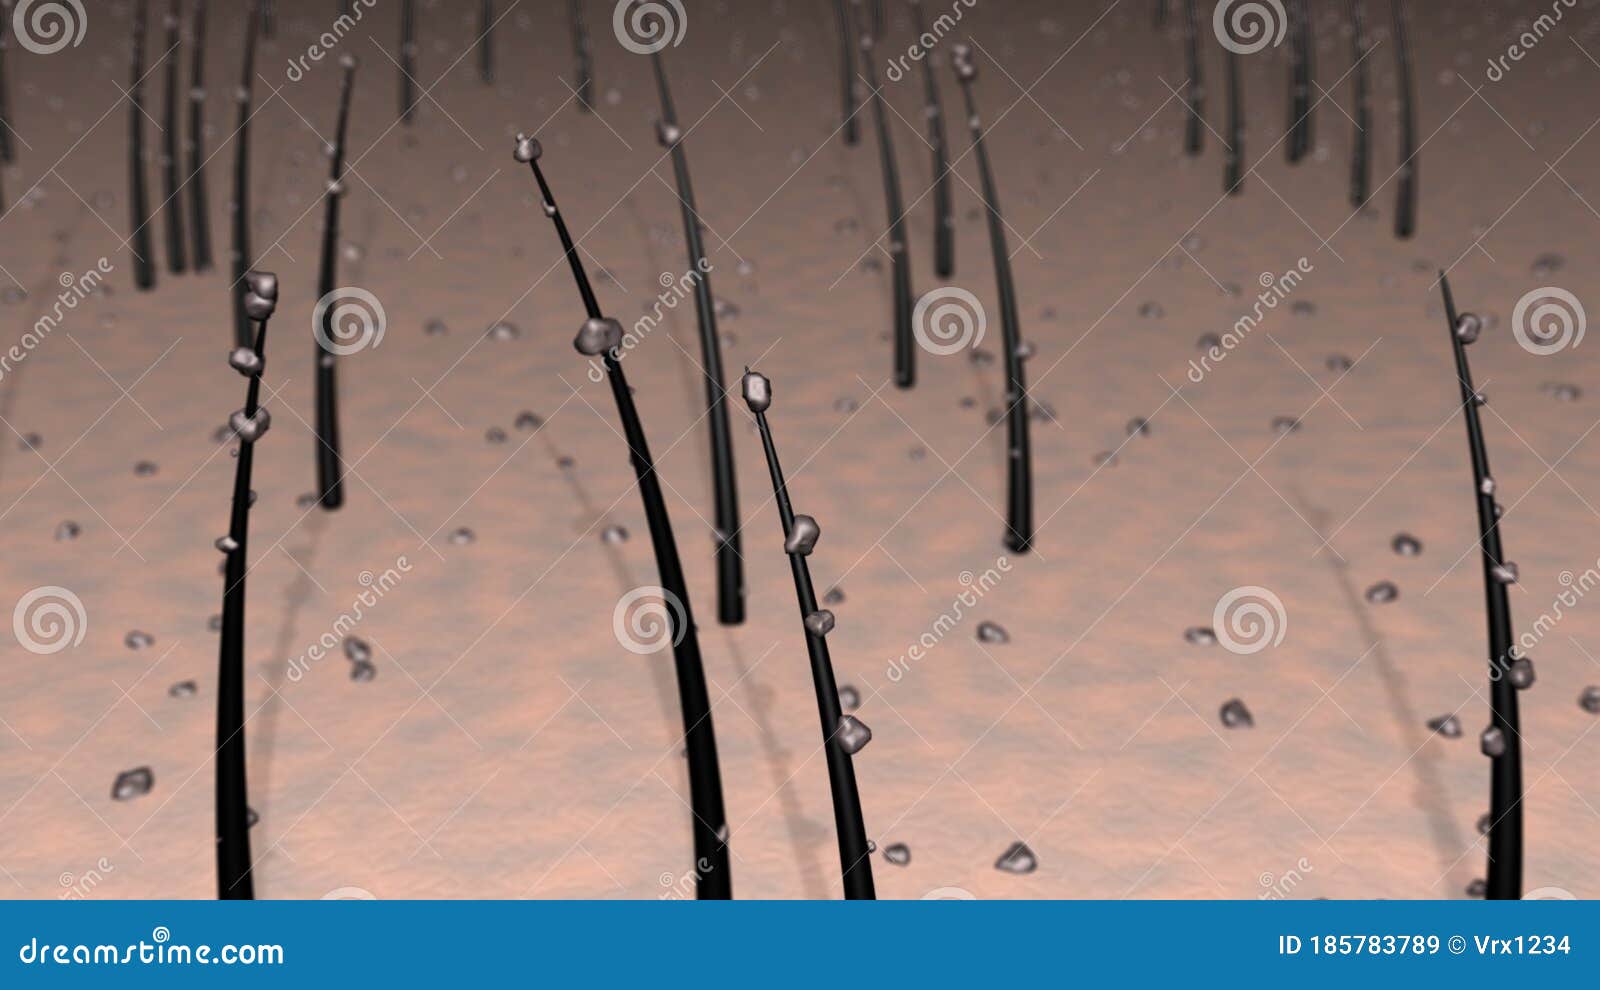 Hair on Skin, Scalp Covered with Dirt Particles, Dandruff, Debris. Close Up  Magnification. View 2. 3d Rendering Illustration Stock Illustration -  Illustration of hair, body: 185783789